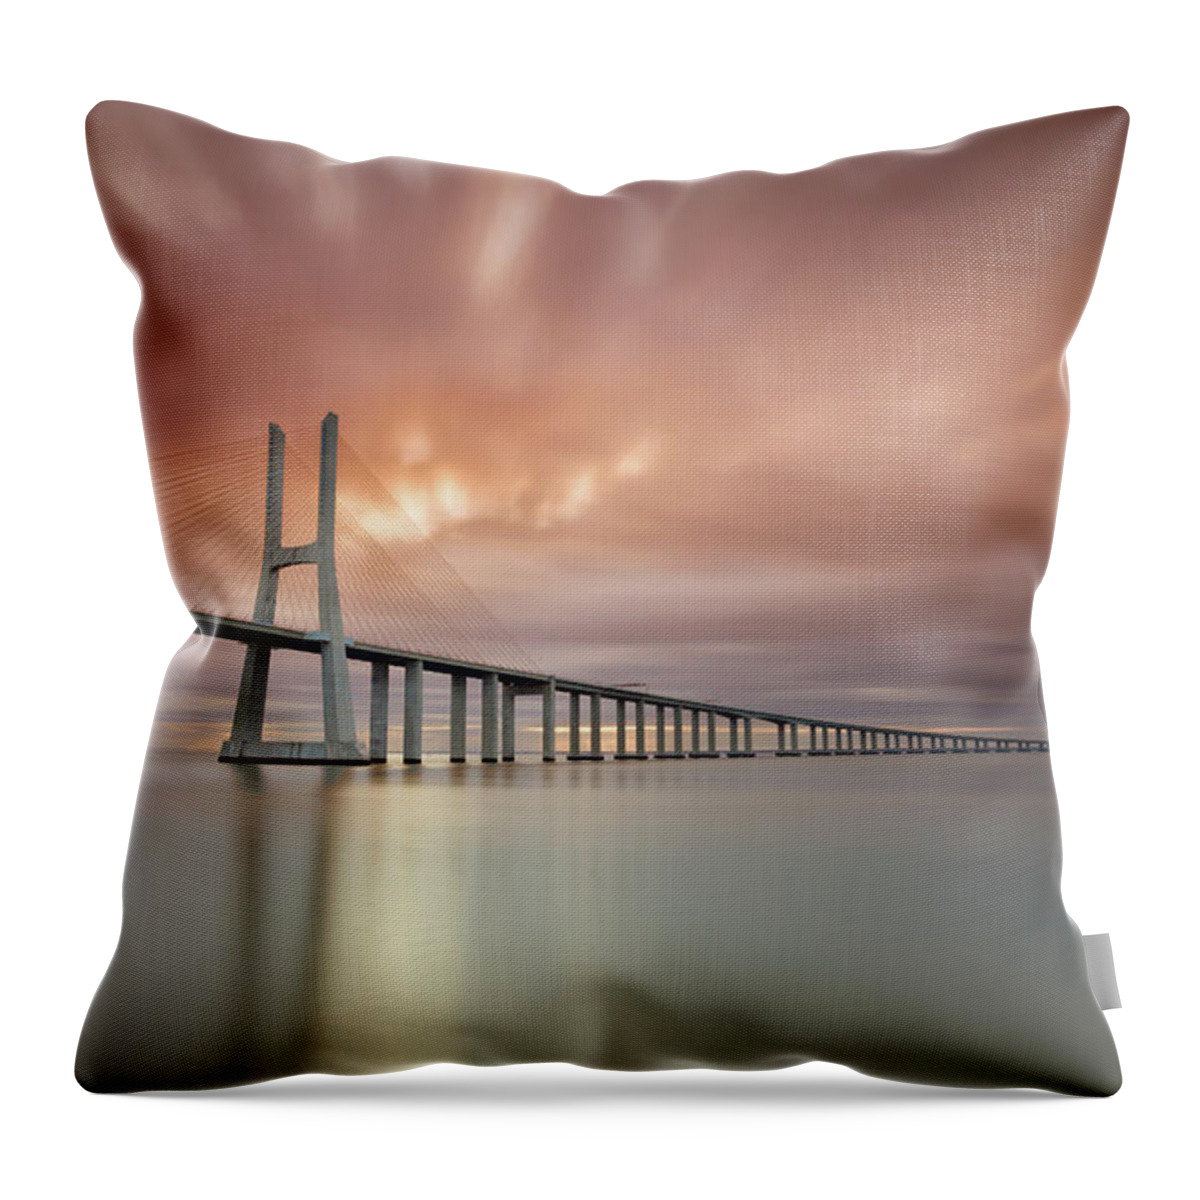 Tranquility Throw Pillow featuring the photograph Burn, Fire Burn by Landscape Photography